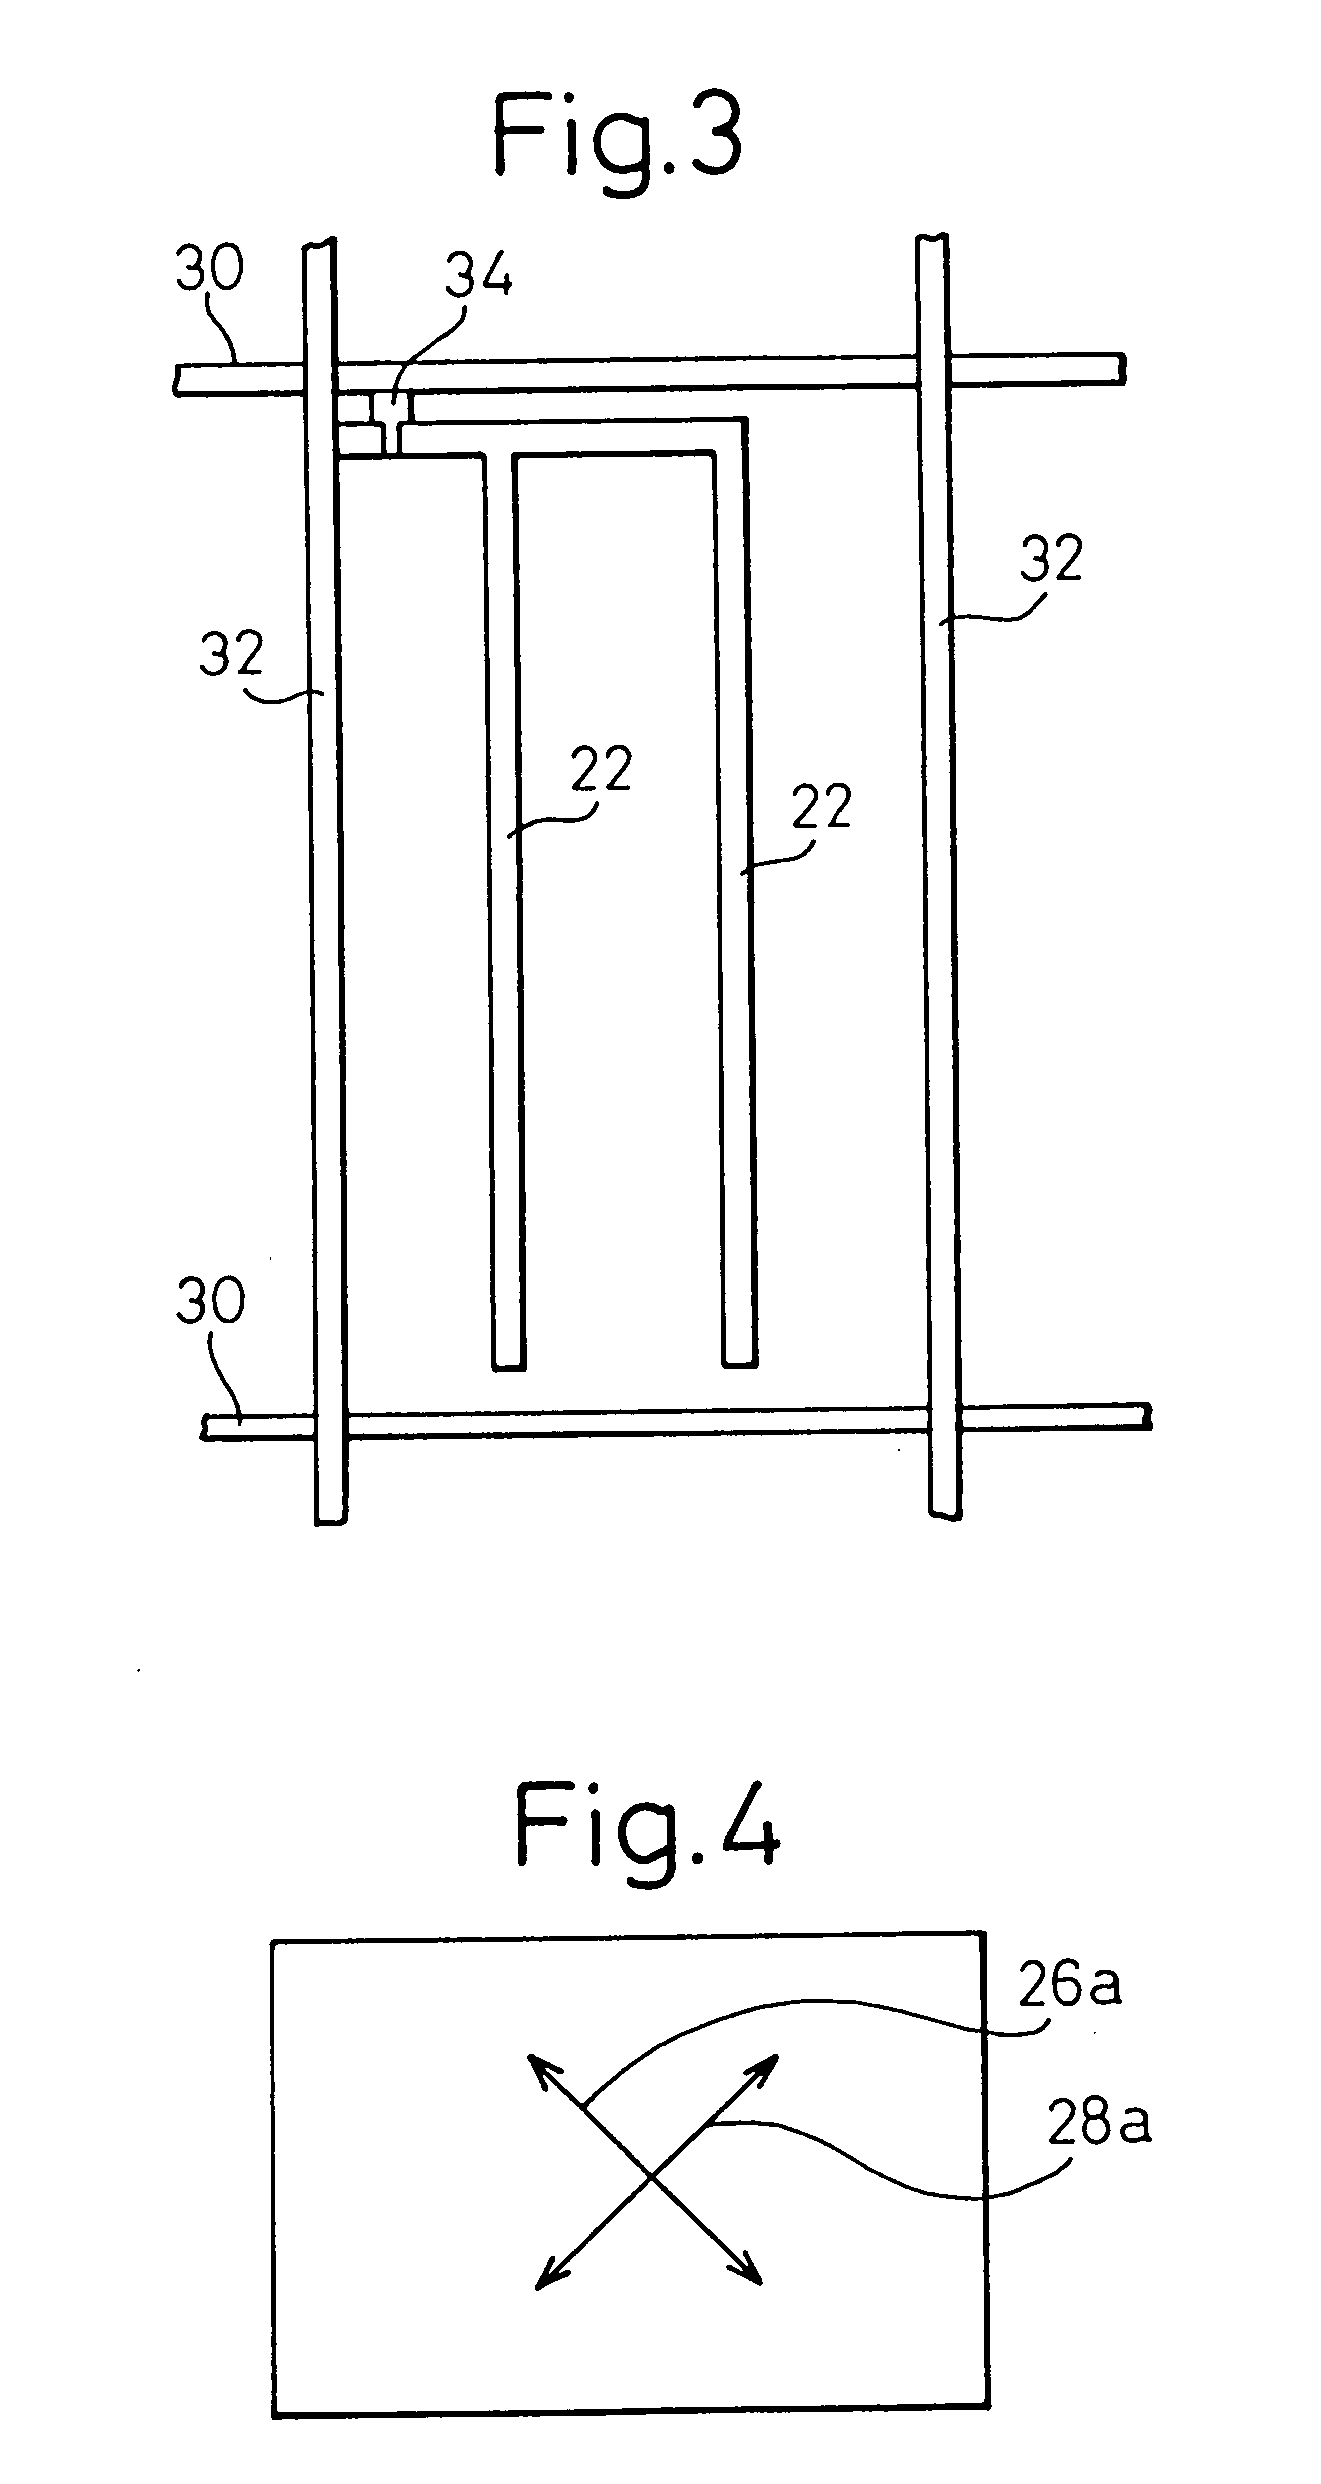 Liquid crystal display apparatus having wide transparent electrode and stripe electrodes